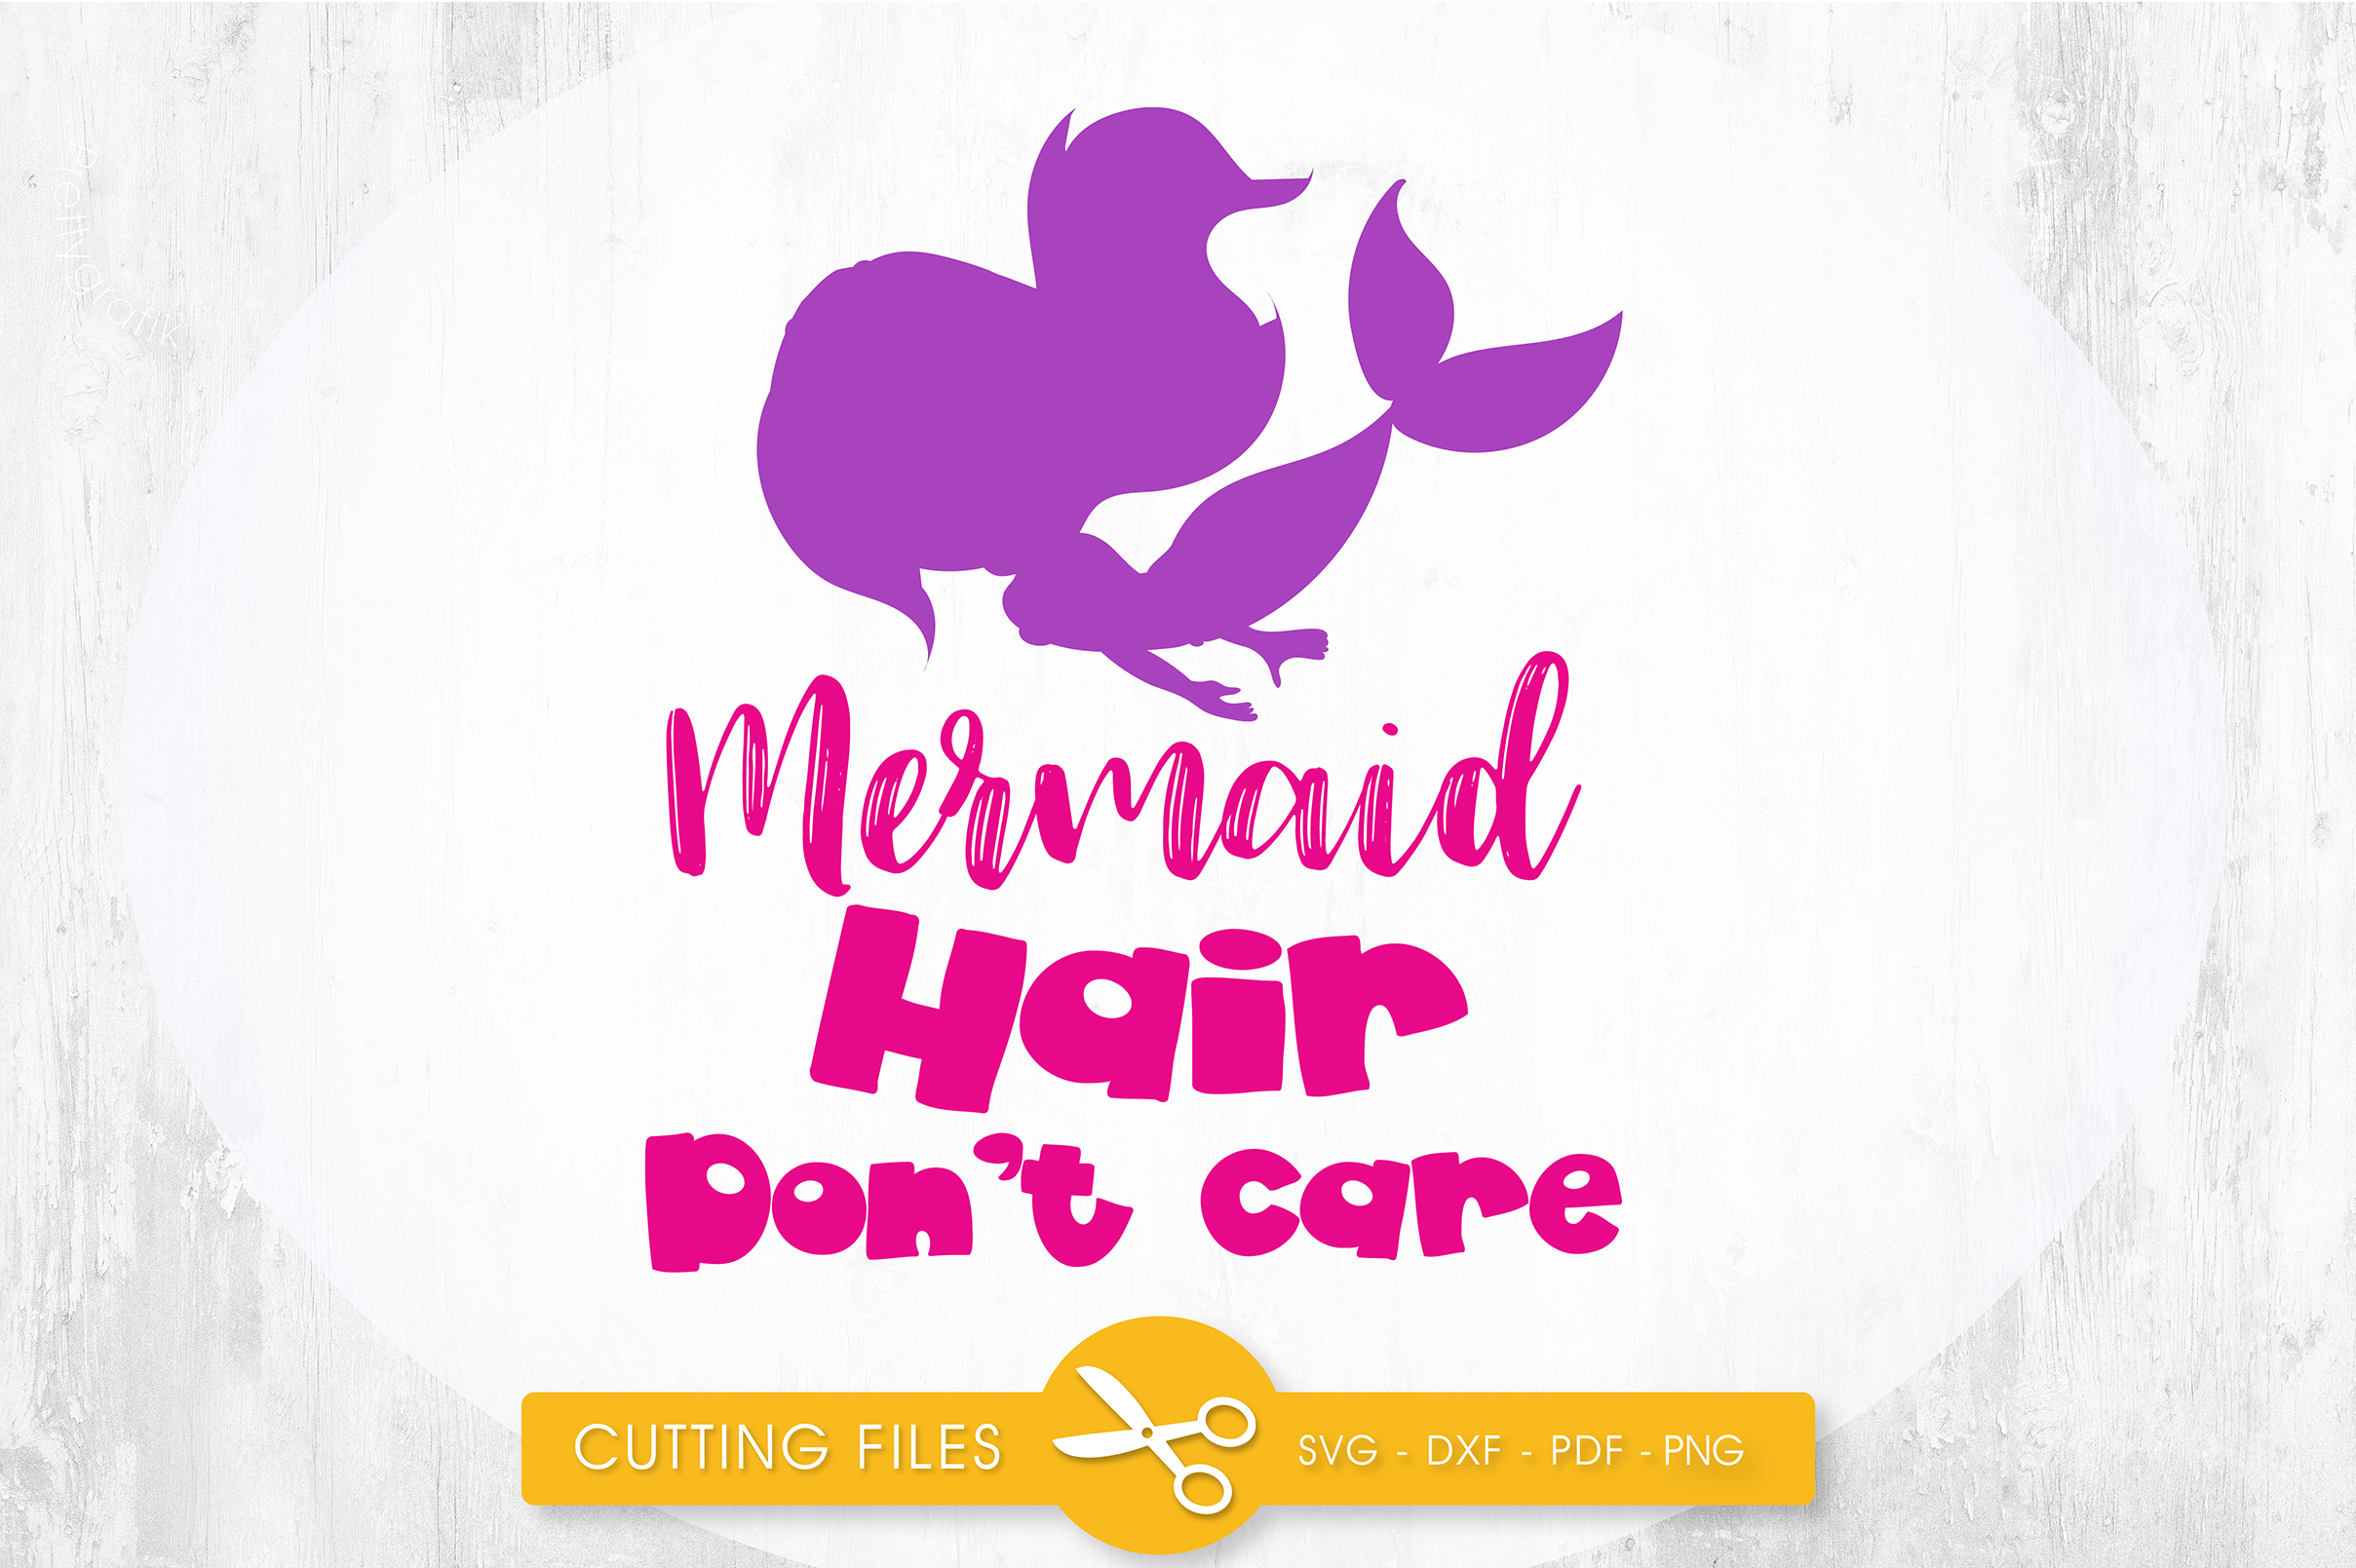 Download mermaid-hair-don't-care cutting files svg, dxf, pdf, eps ...